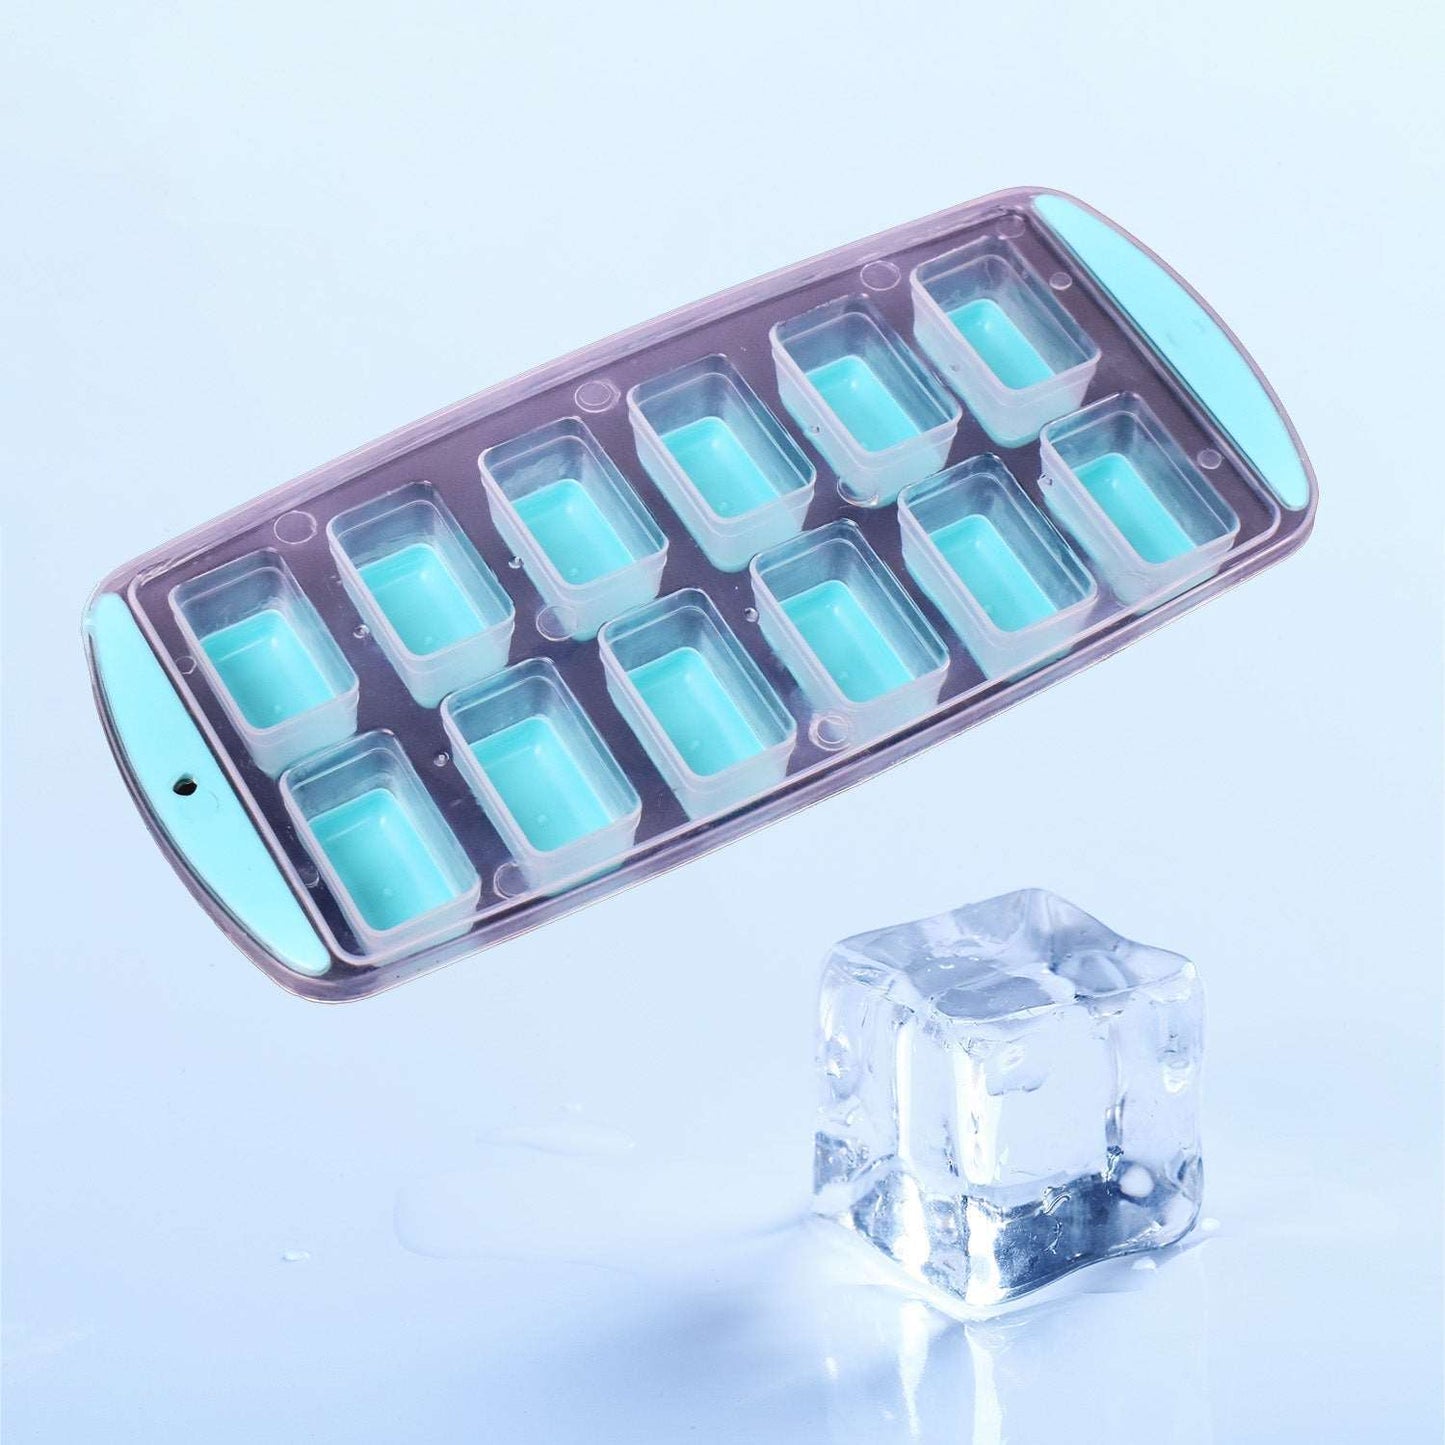 12 Grid Silicon Ice cubes Making Tray Food Grade Square Ice Cube Tray | Easy Release Bottom Silicon Tray